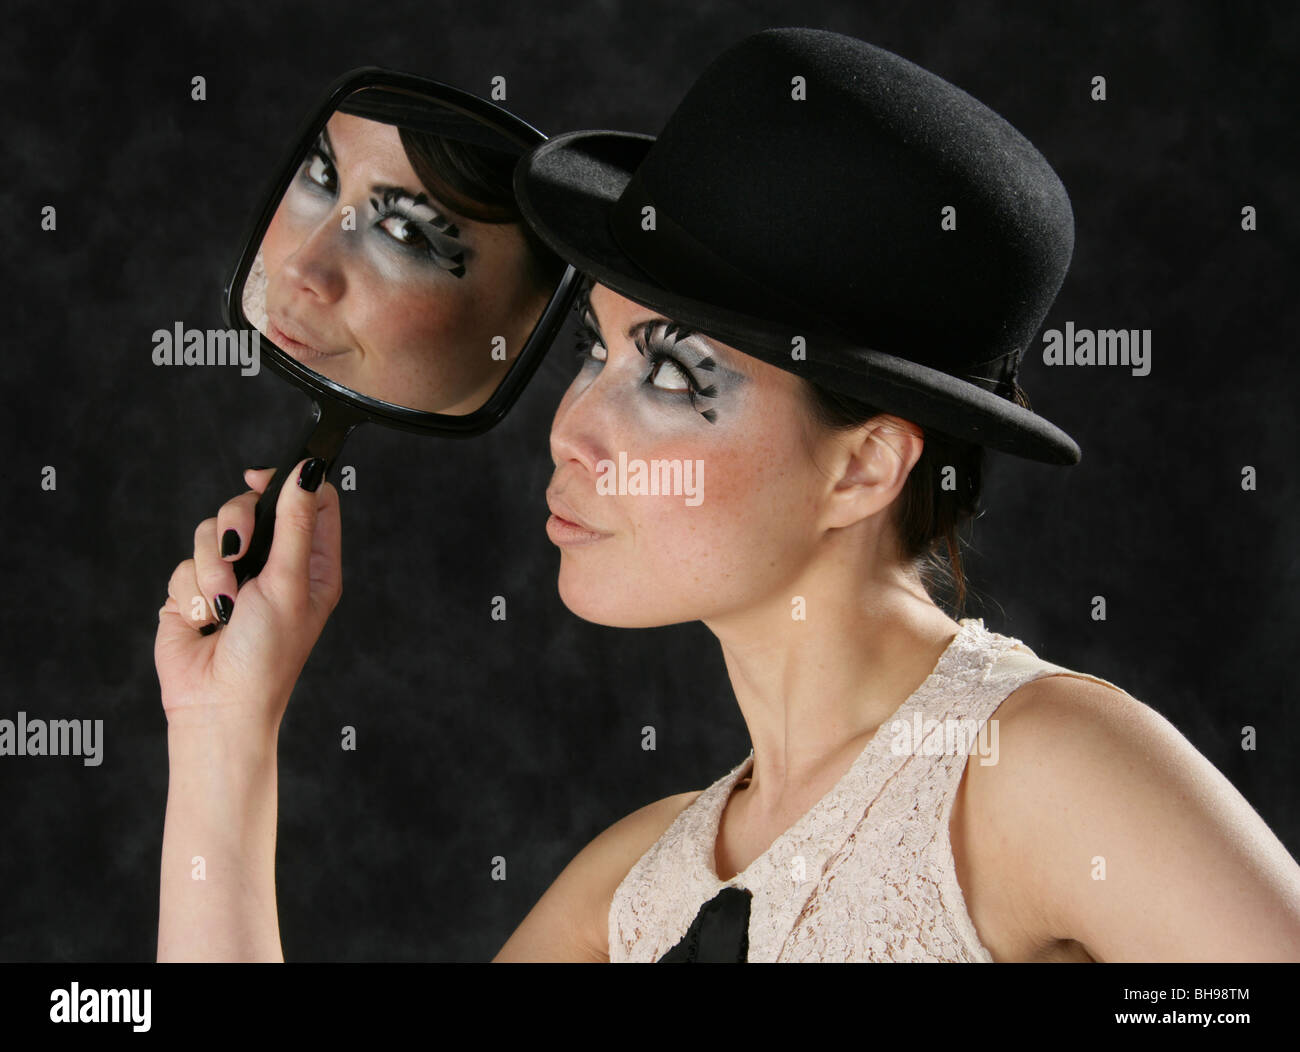 Young Woman Looking at Her Reflection in a Hand Mirror Stock Photo